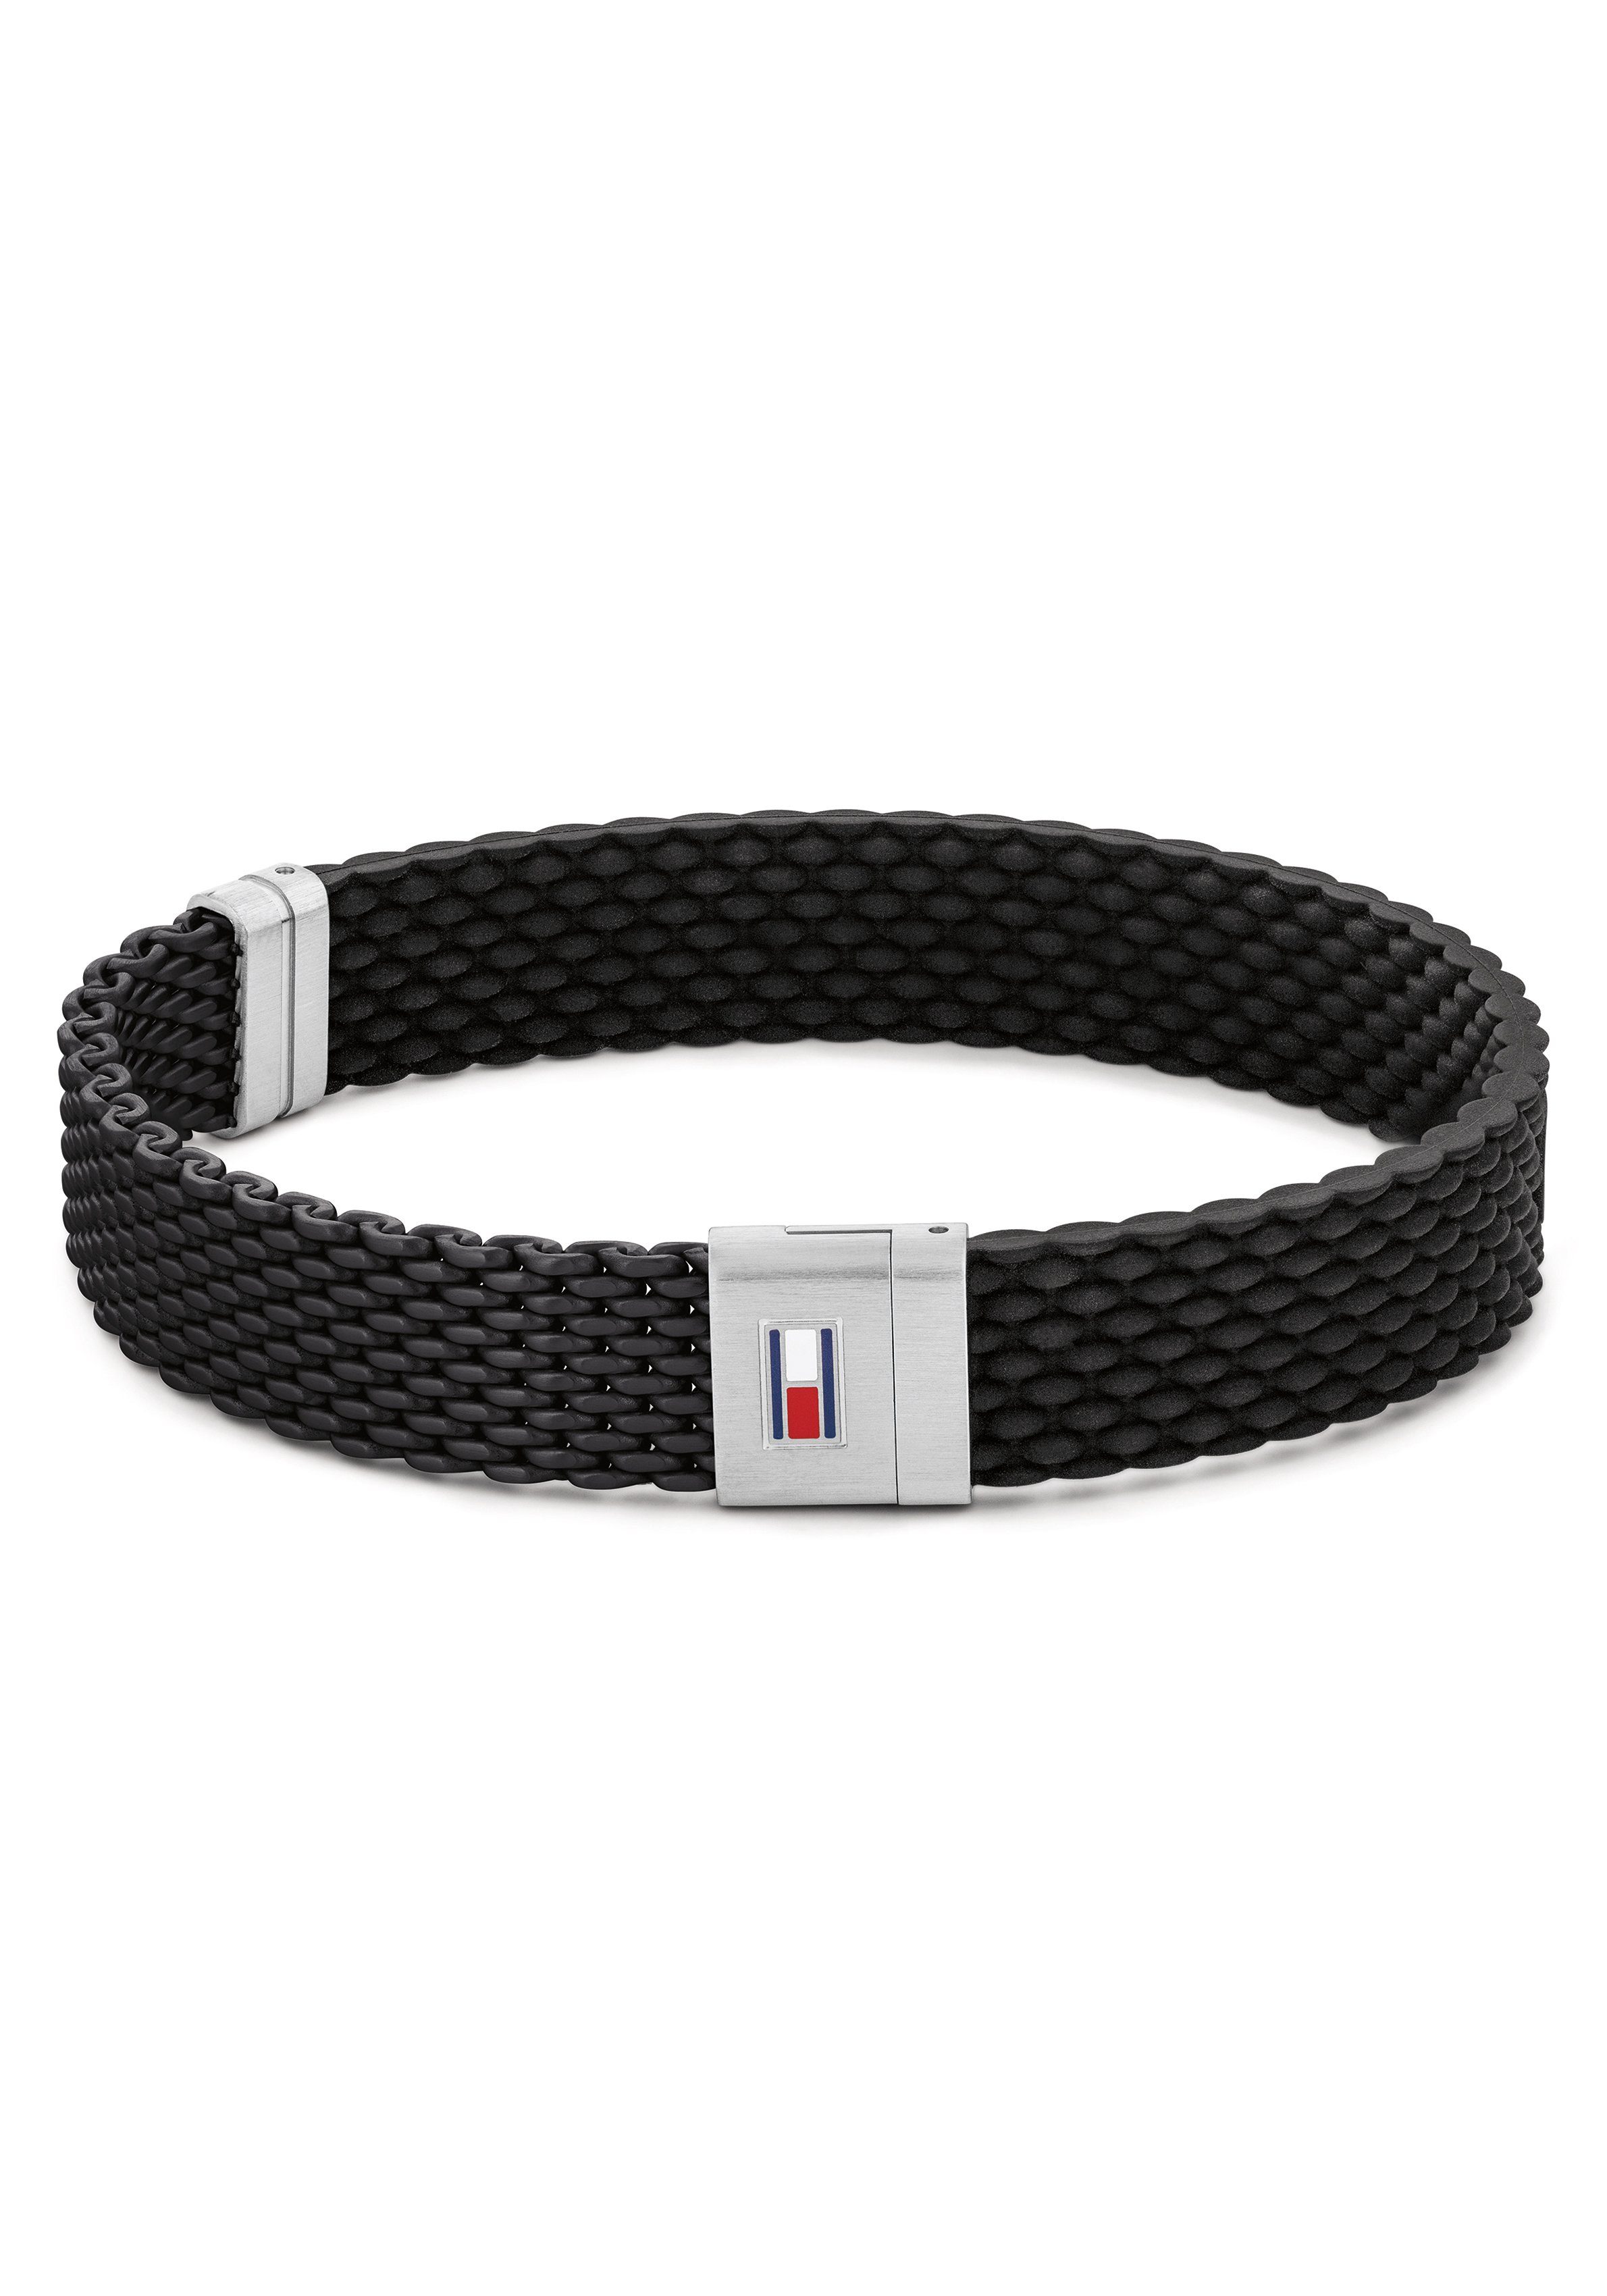 Tommy Hilfiger Armband »CASUAL, 2790240S«, mit Emaille online kaufen | OTTO